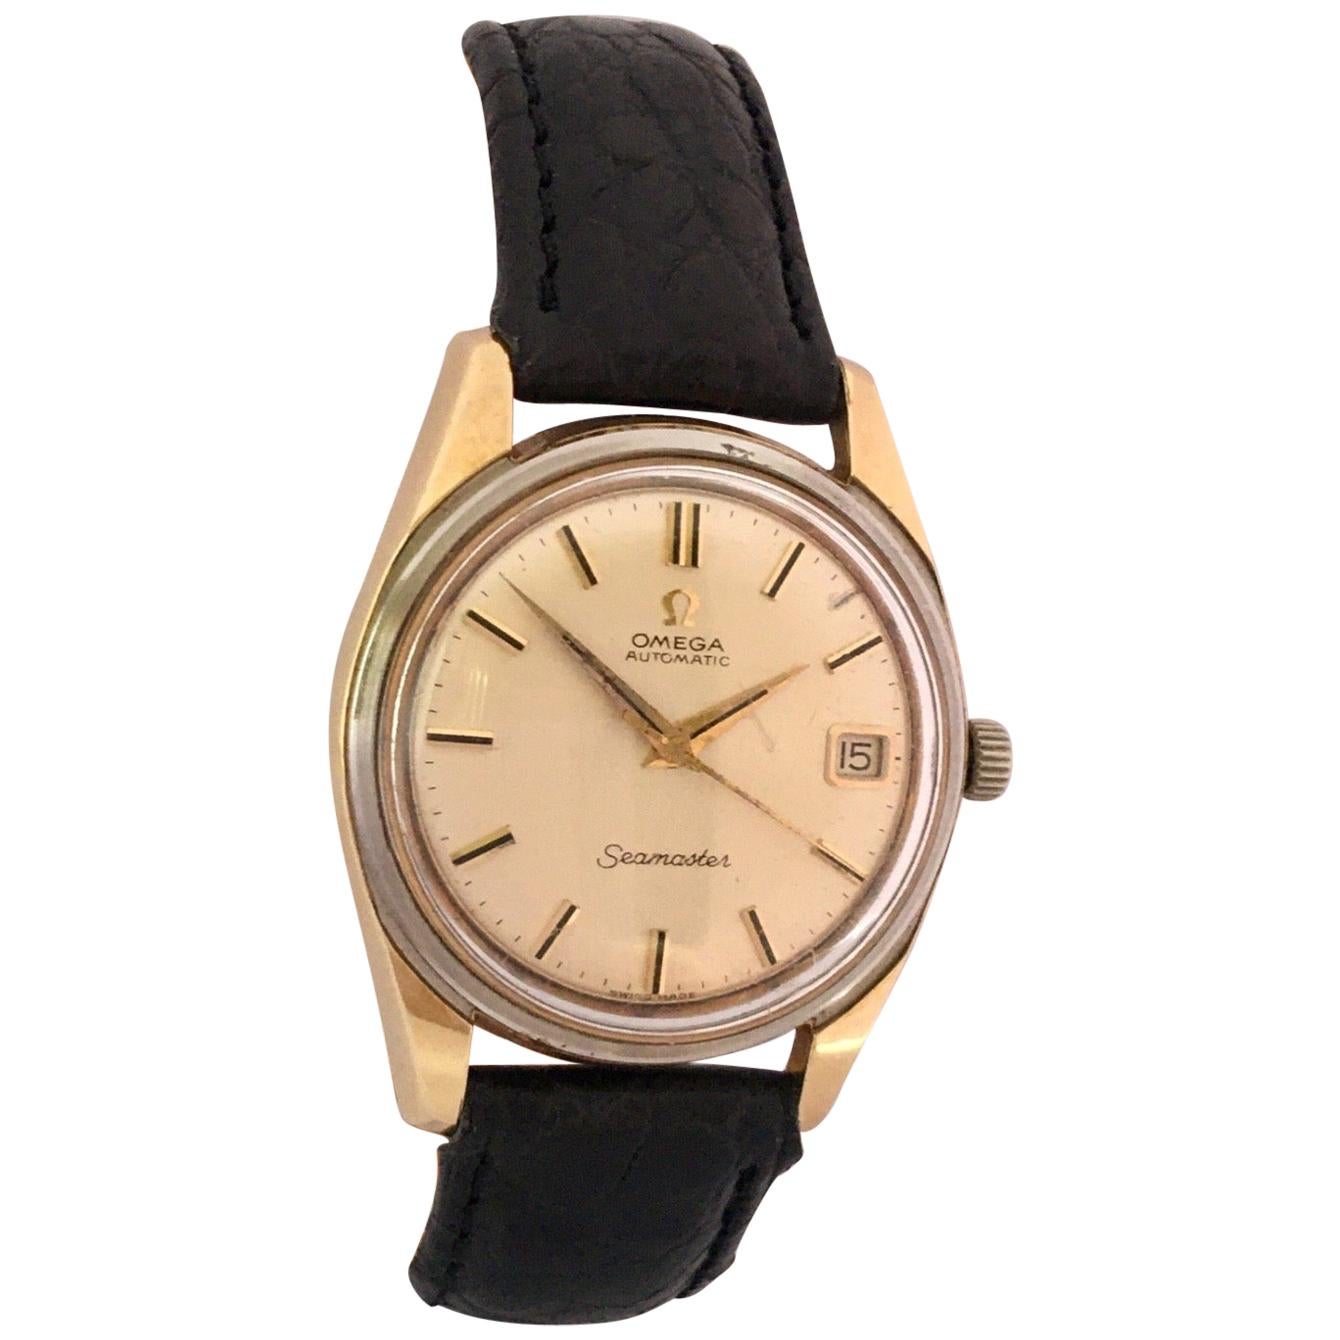 Omega Seamaster automatic gold plated and stainless steel Wristwatch circa 1965, serial no. 227604xx, circular silvered dial with baton markers, date aperture and sweep centre seconds, cal. 562 24 jewel movement, signed case, new fitted non-omega